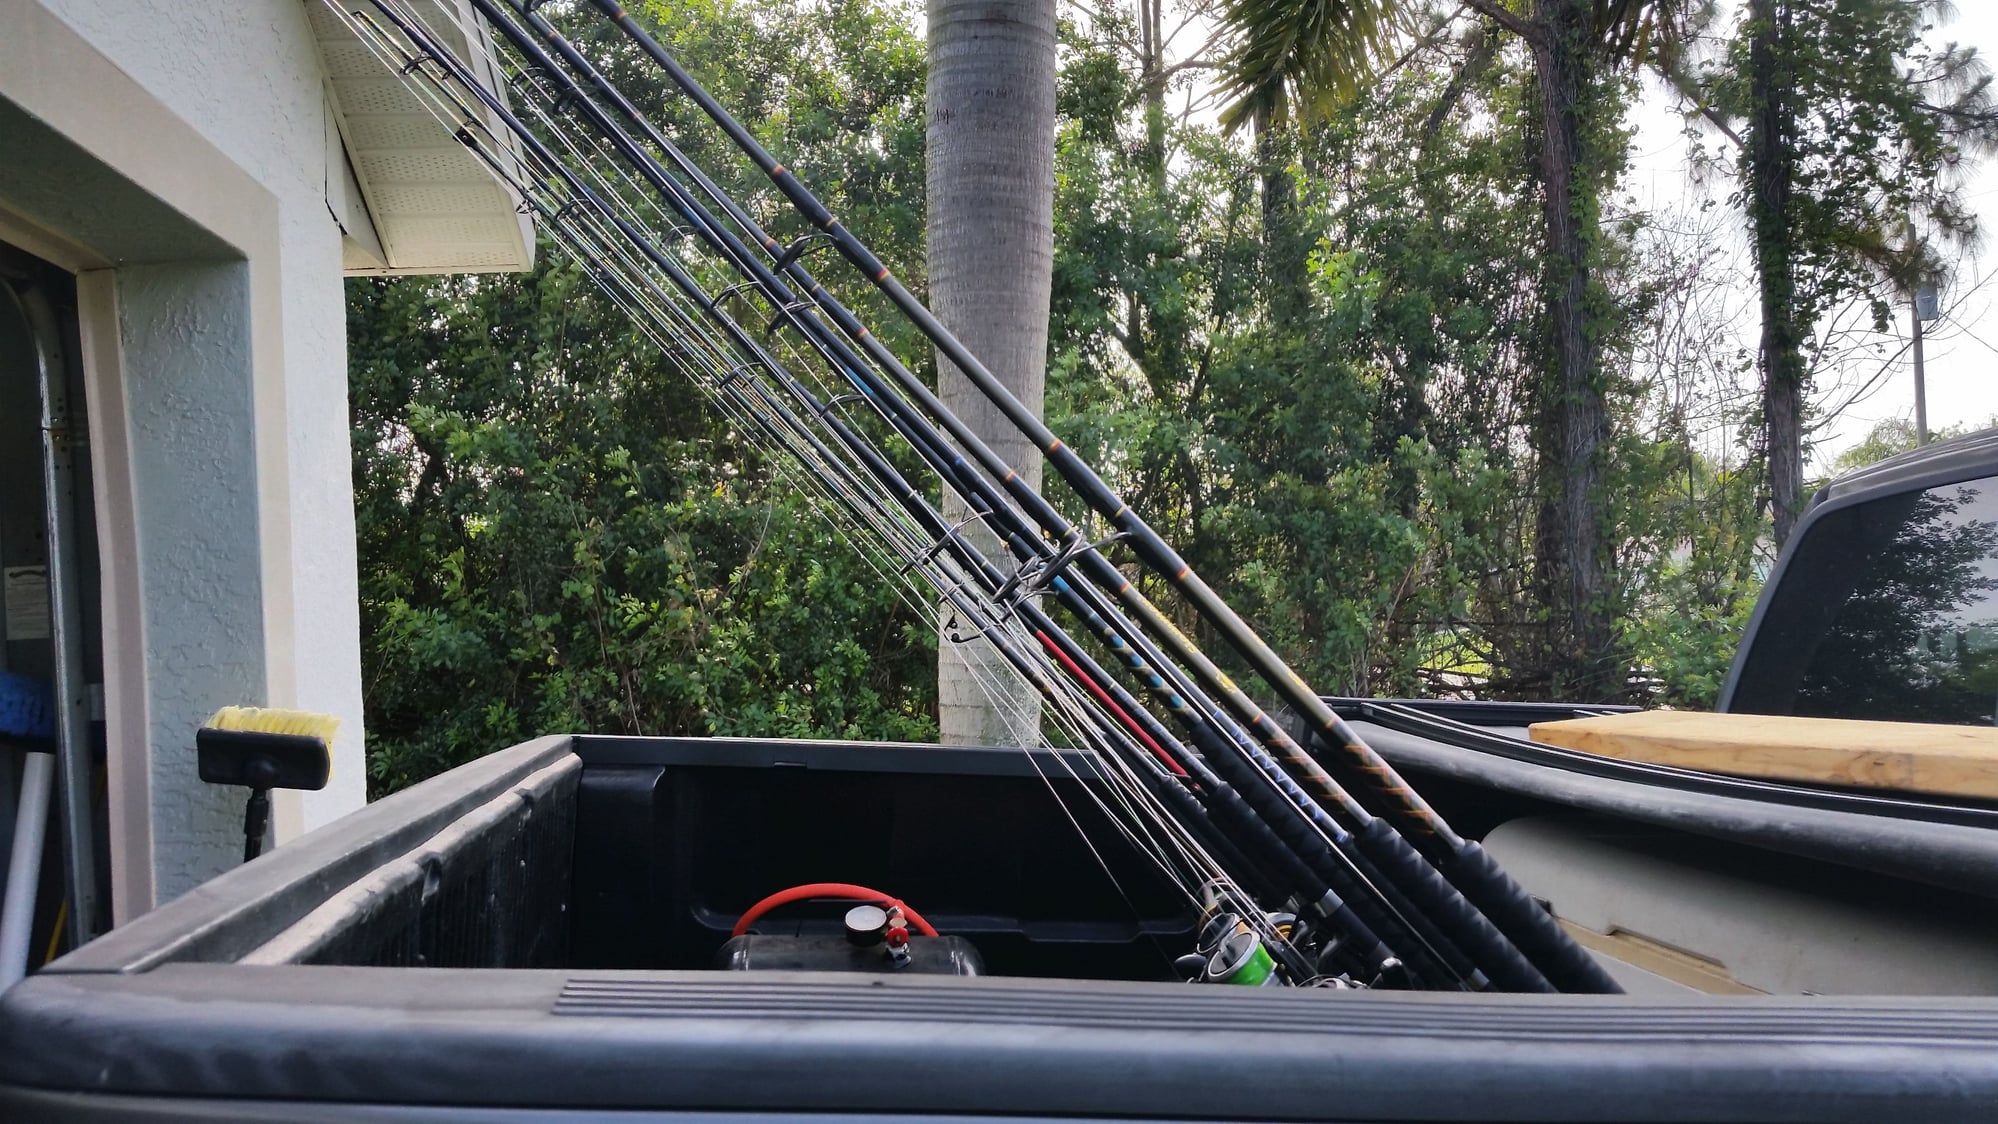 Truck Bumper rod holder for hitch - The Hull Truth - Boating and Fishing  Forum